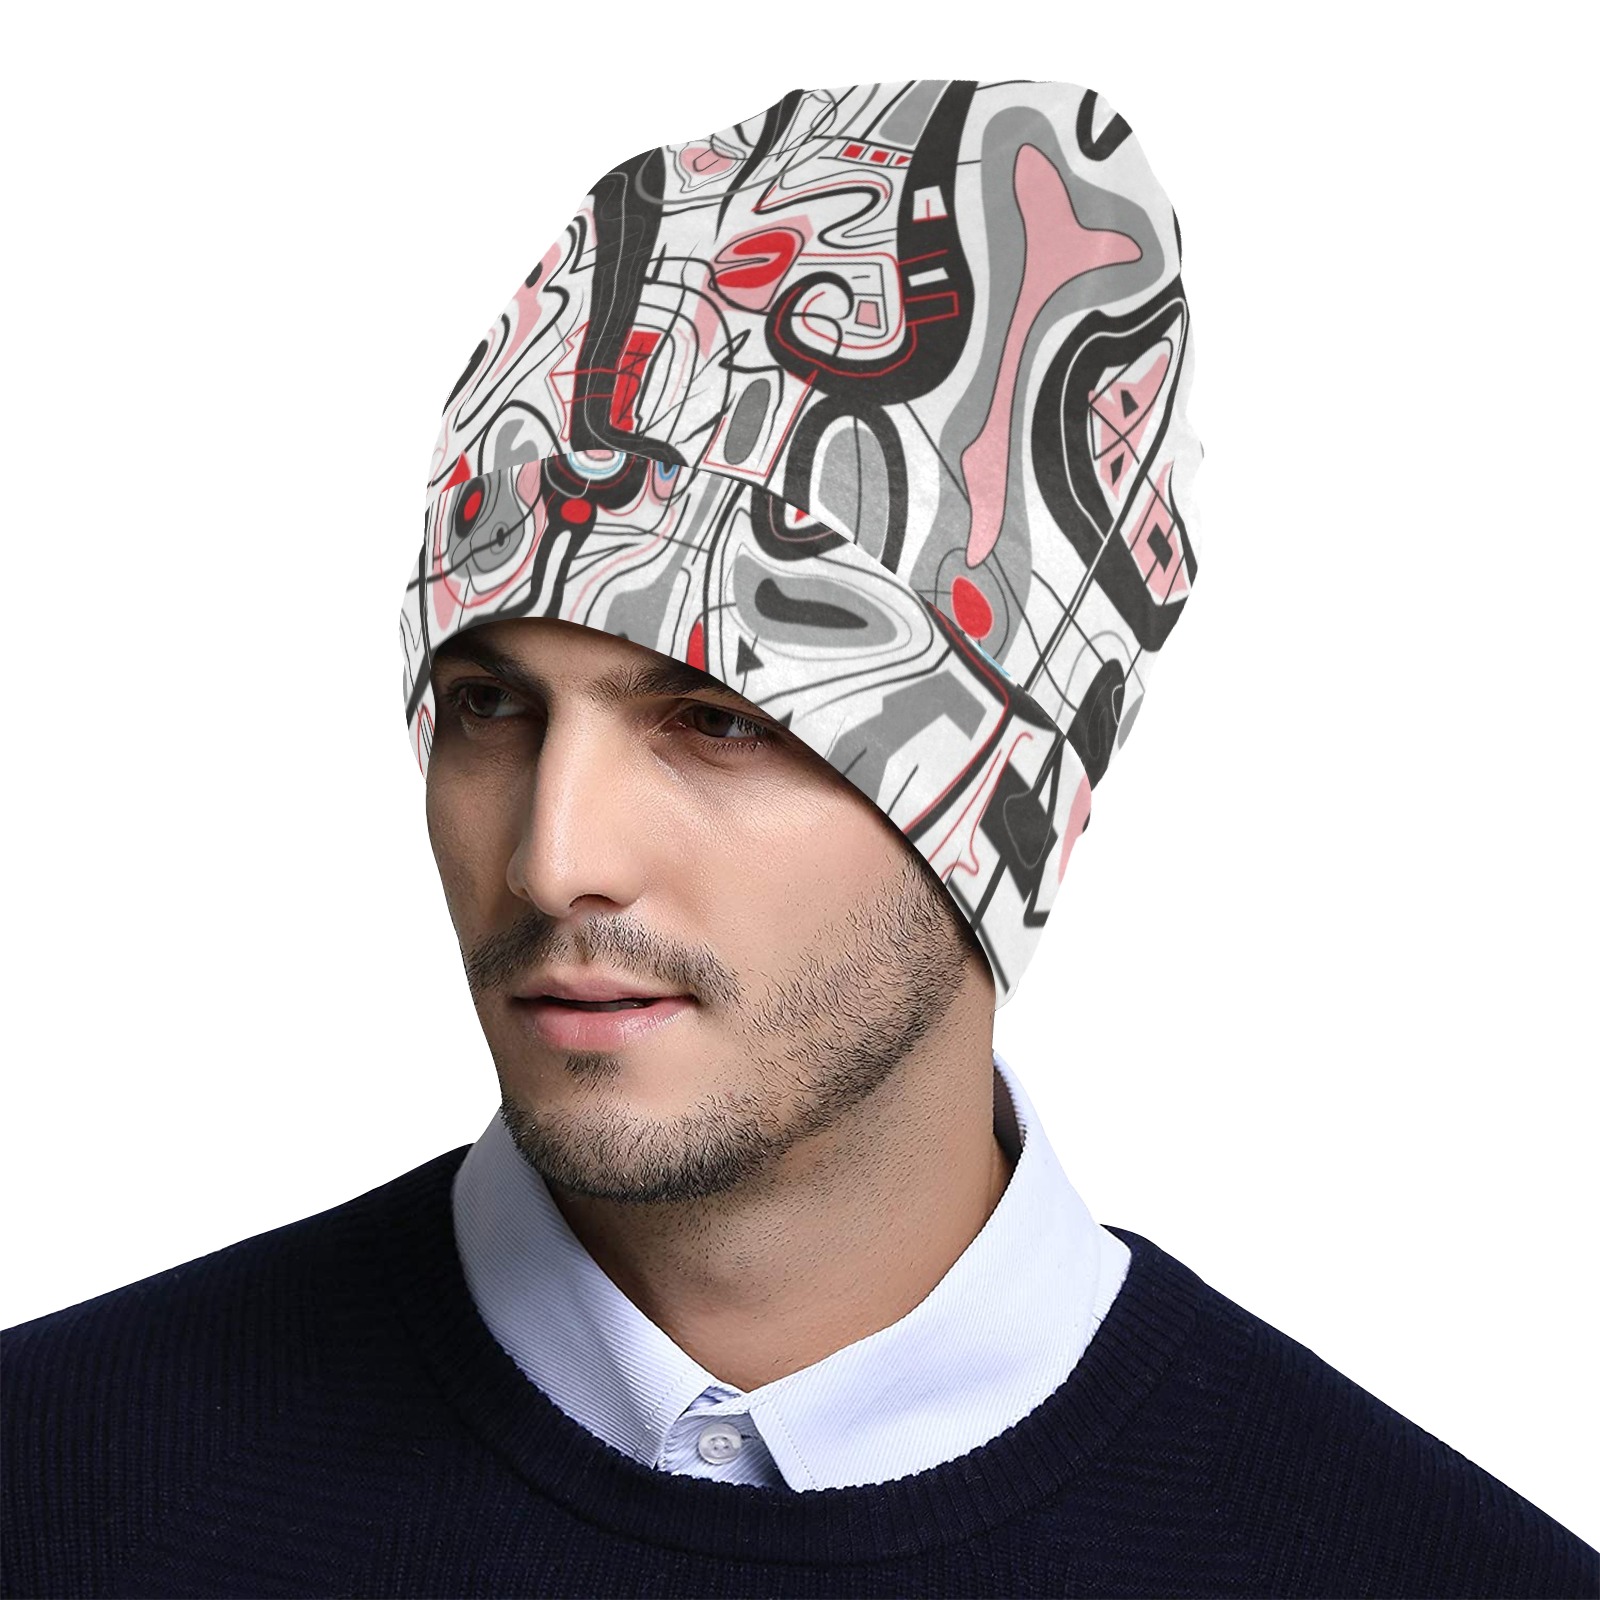 Model 2 All Over Print Beanie for Adults